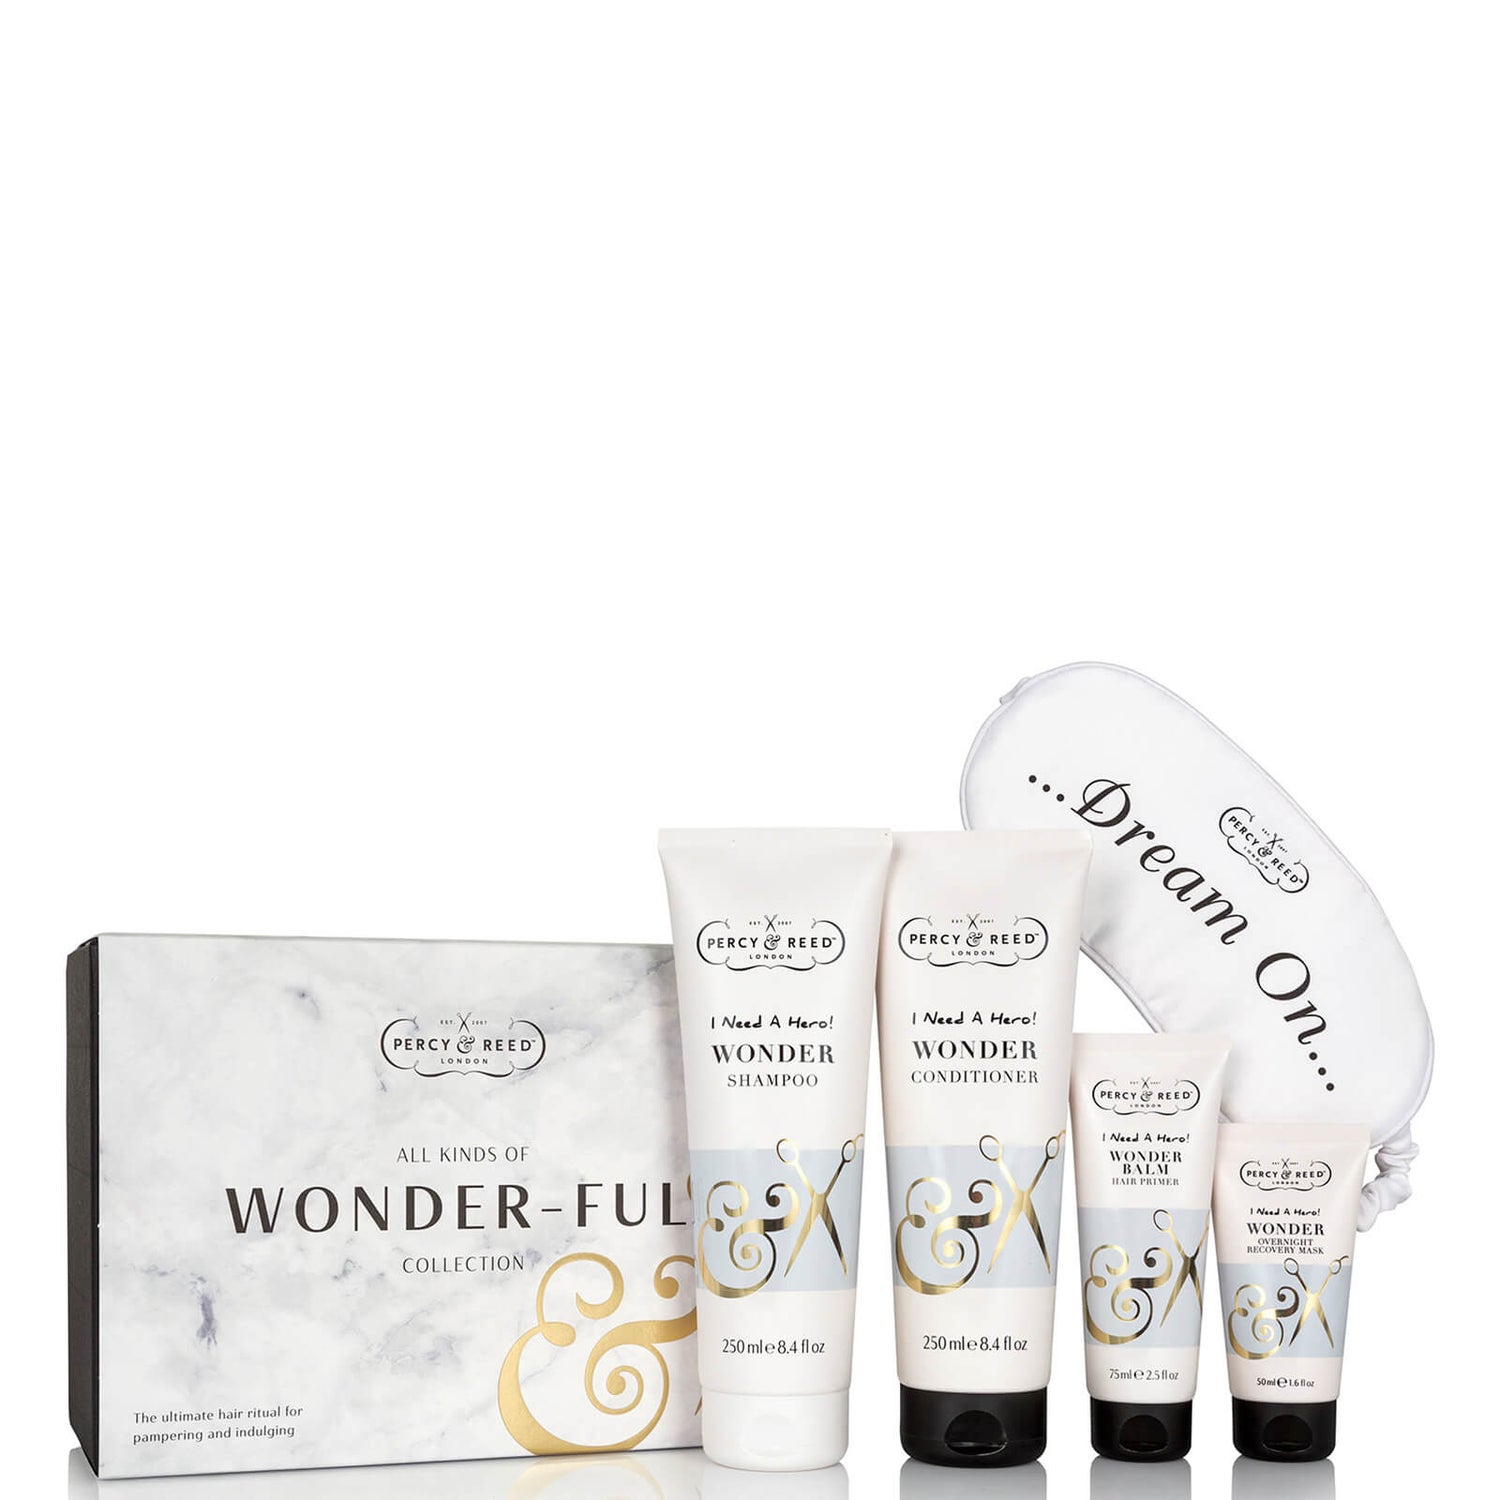 Percy & Reed All Kinds of Wonder-Ful Gift Set (Worth £74.00)